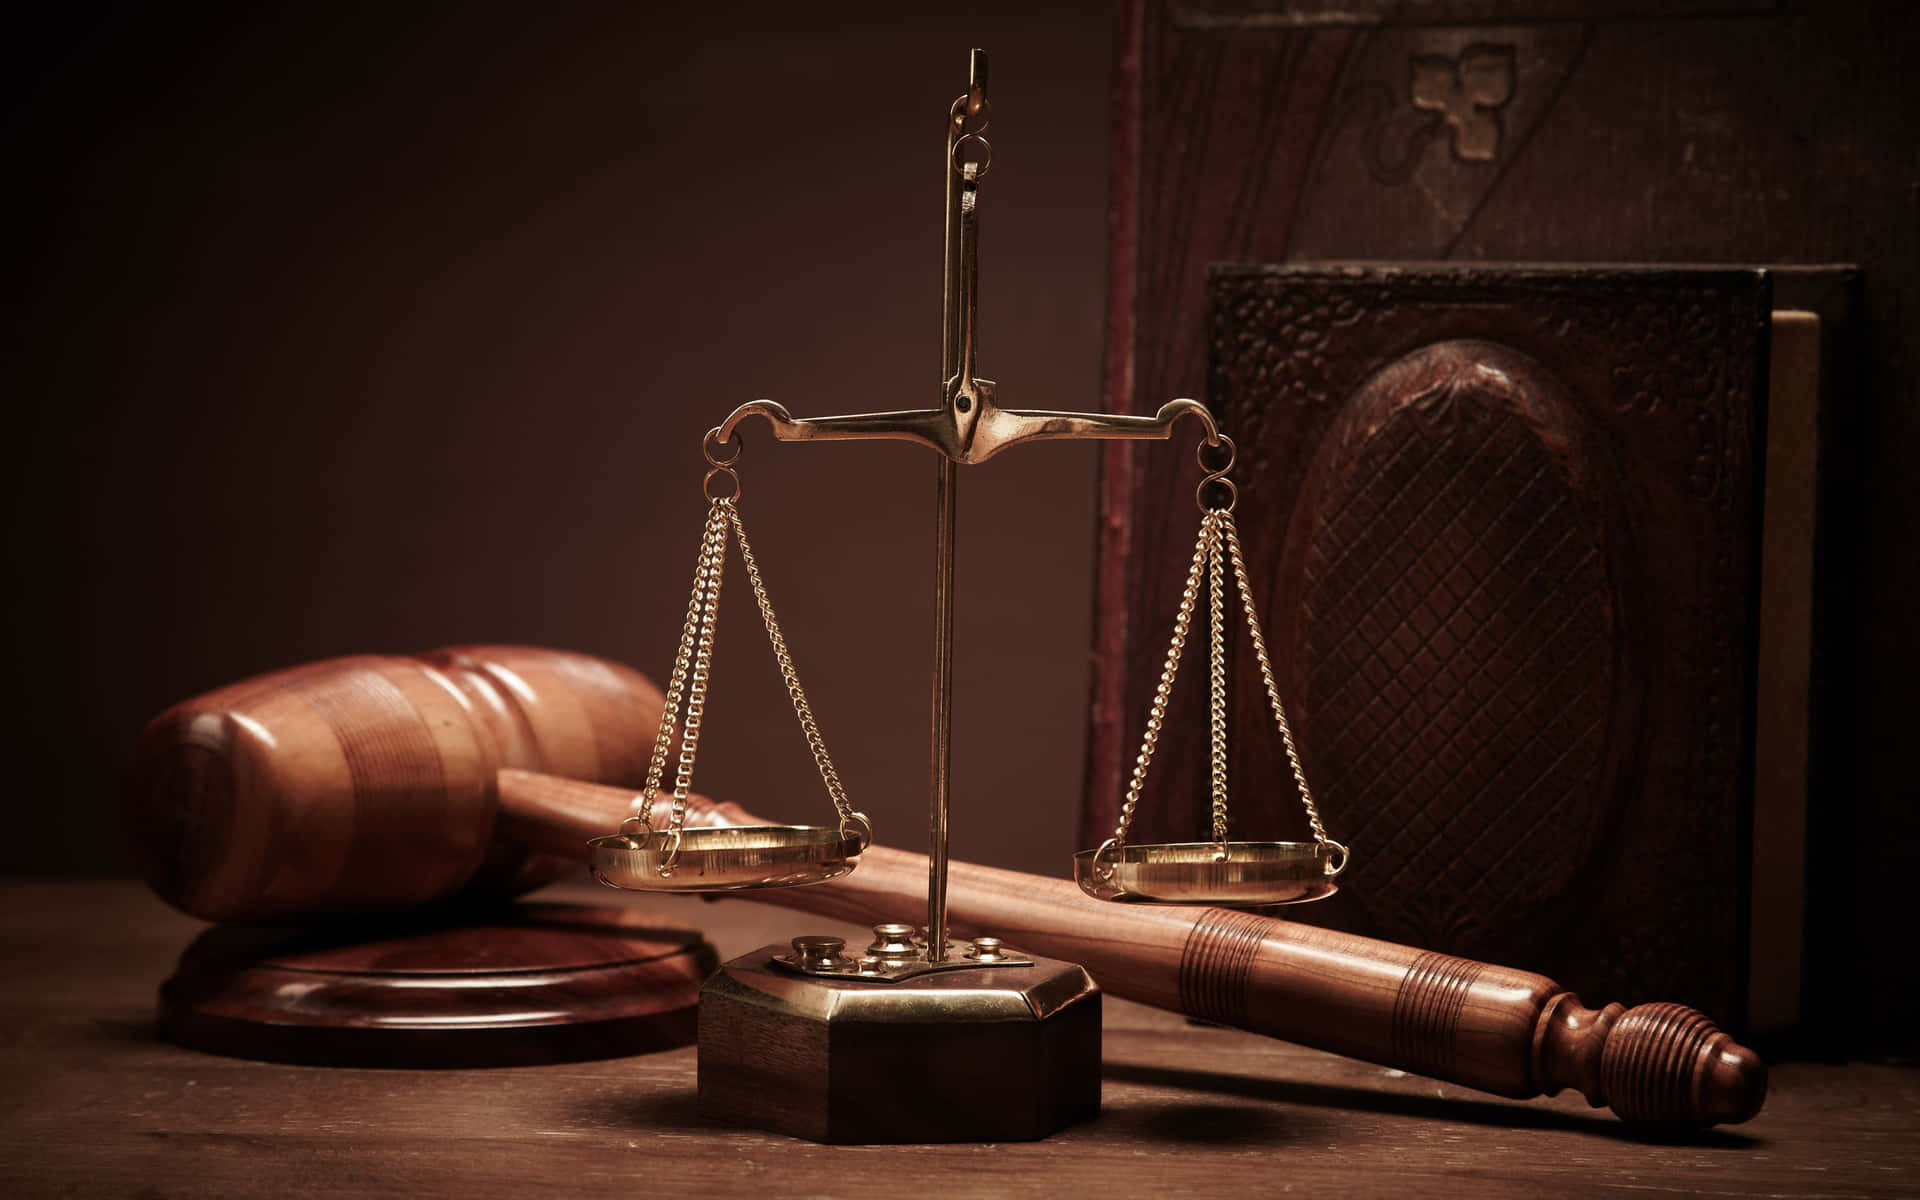 A Judge's Scale And Gavel On A Wooden Table